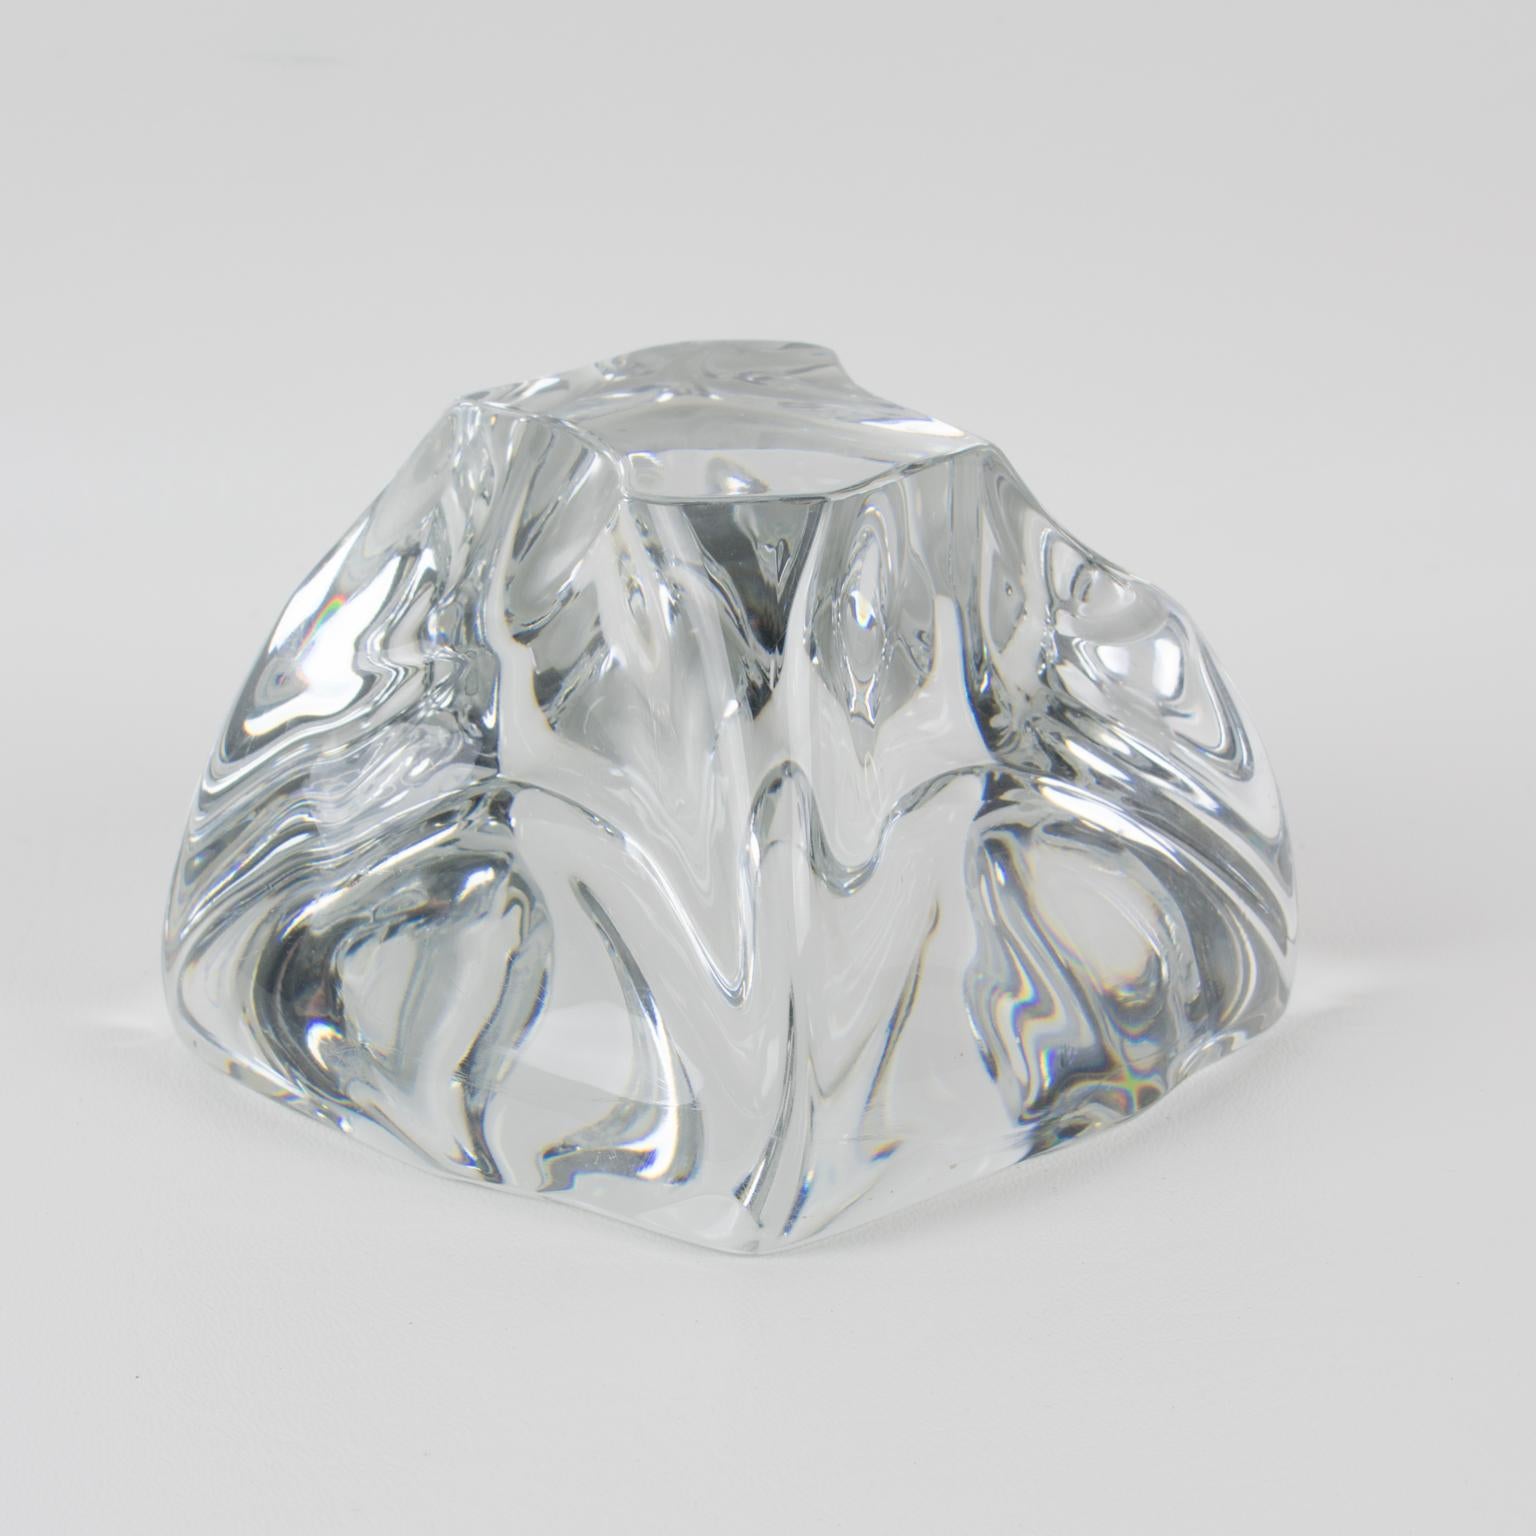 This stunning crystal abstract freeform desktop paperweight is by Daum, France. The sculpture features a French design of the 1950s with a mouth-blown clear crystal in an abstract figure in a curved swirl-like form. The piece is engraved on the side